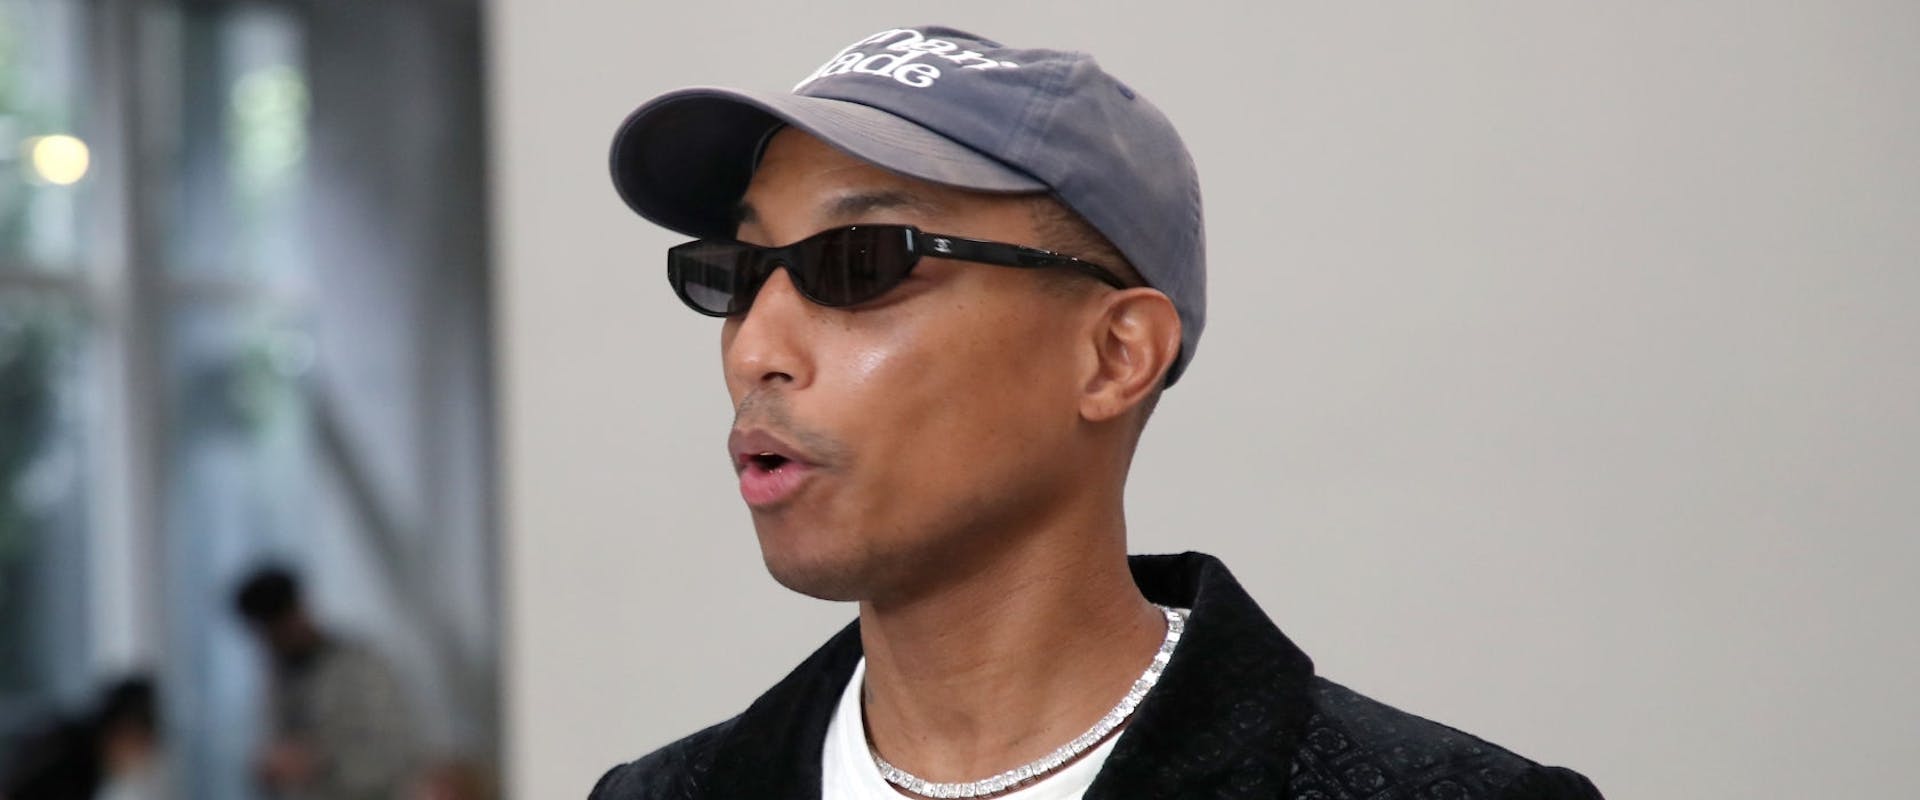 Pharrell Williams attends the Chanel Metiers D'Art 2021-2022 show at Le 19M on December 07, 2021 in Paris, France.